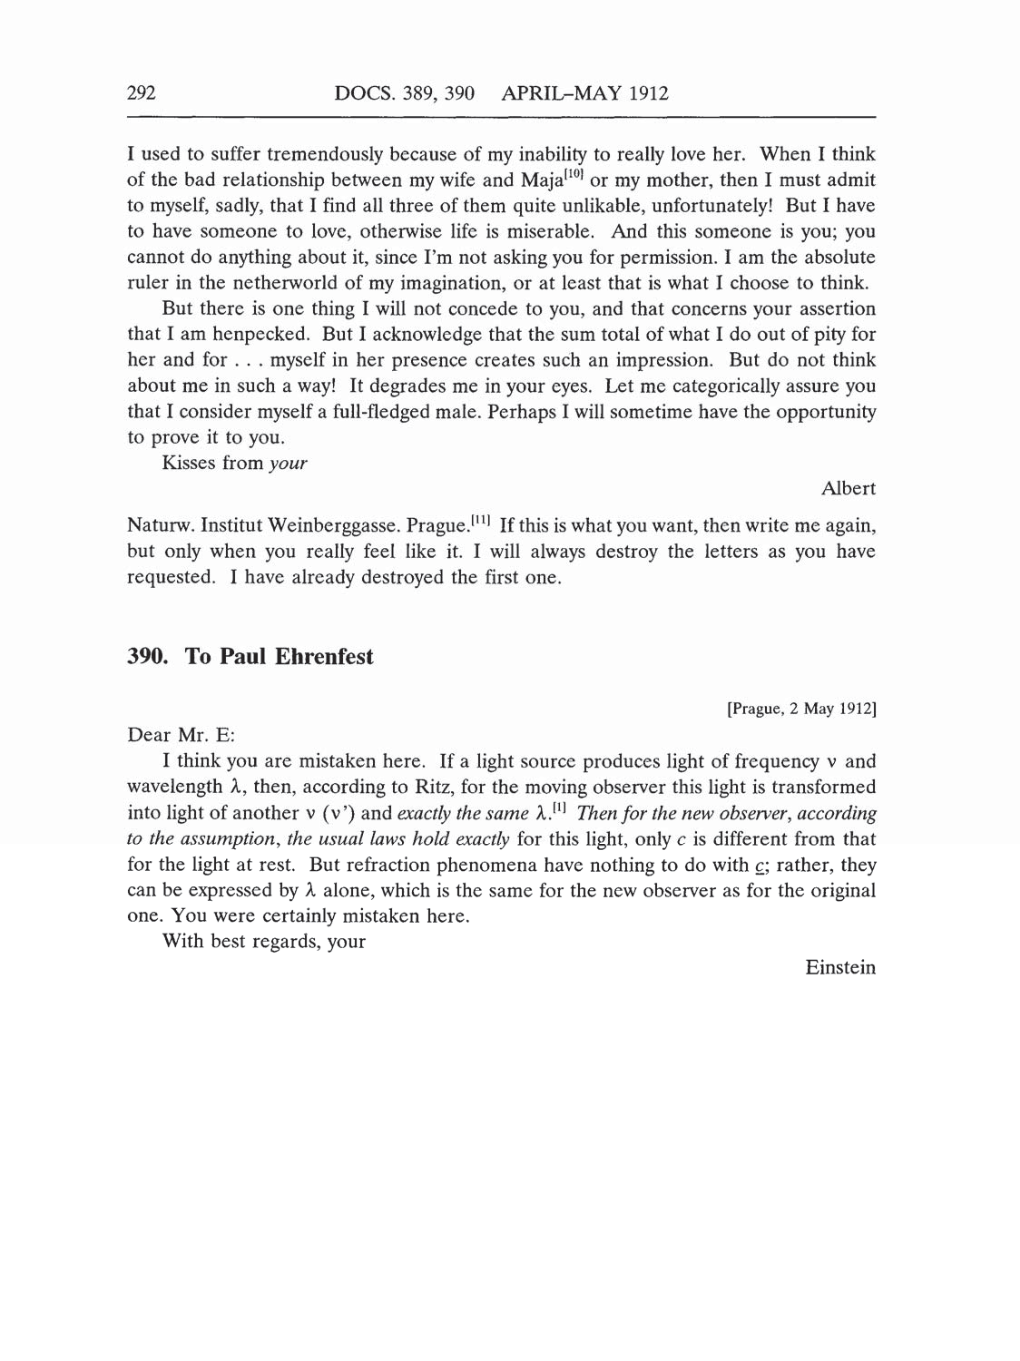 Volume 5: The Swiss Years: Correspondence, 1902-1914 (English translation supplement) page 292